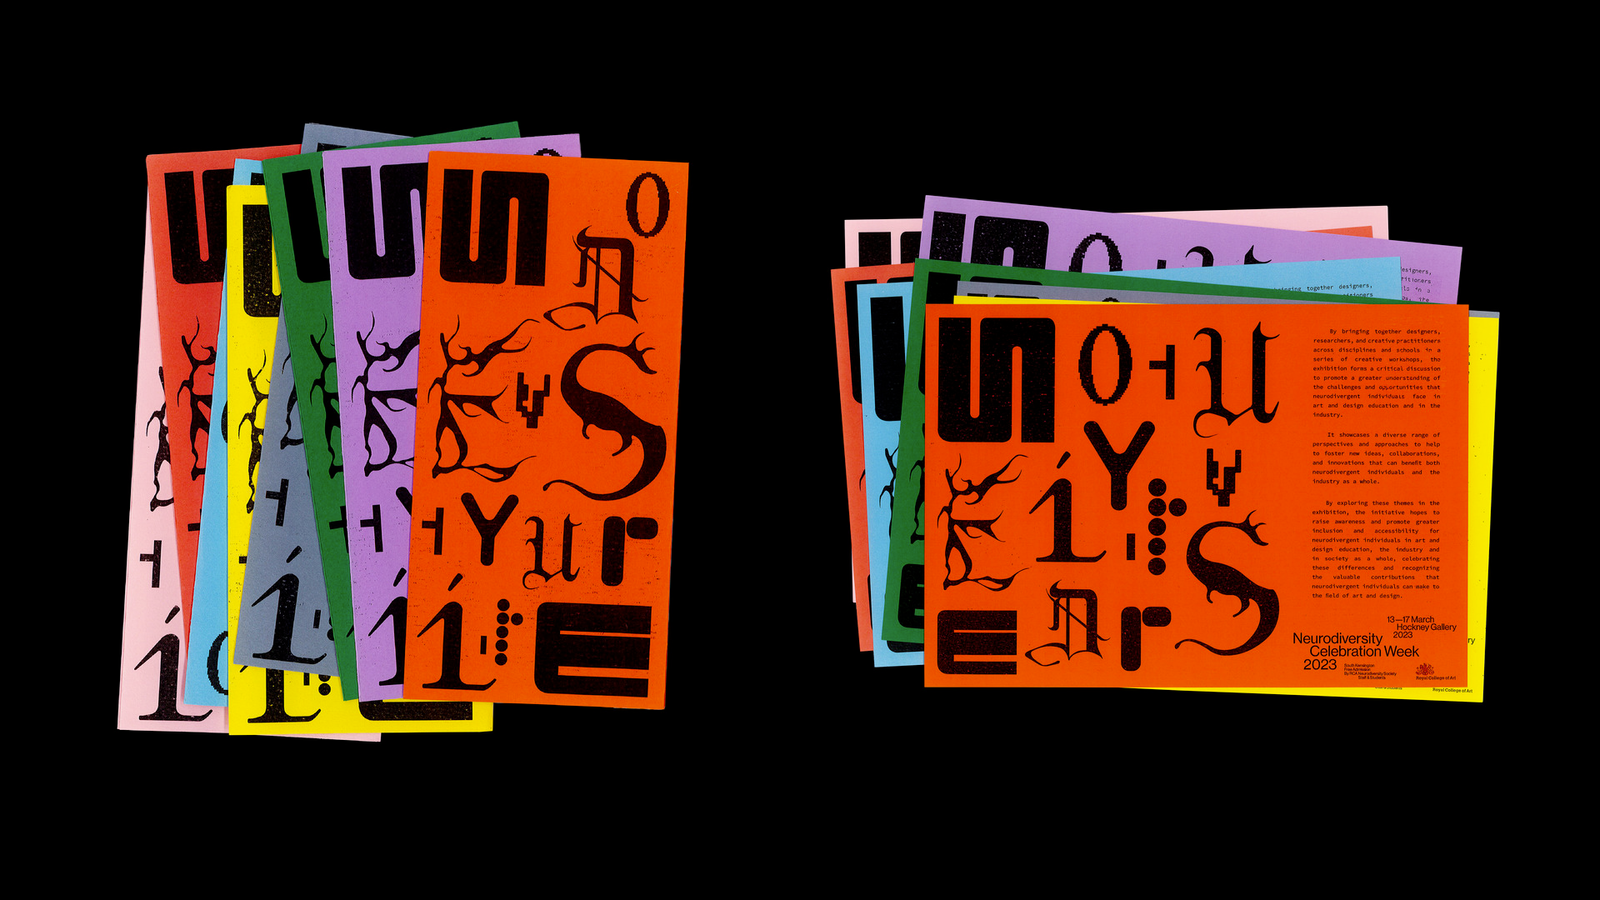 Orange exhibition guides with black glyph forms, each a different hand-drawn character spelling out ‘Neurodiversity'.